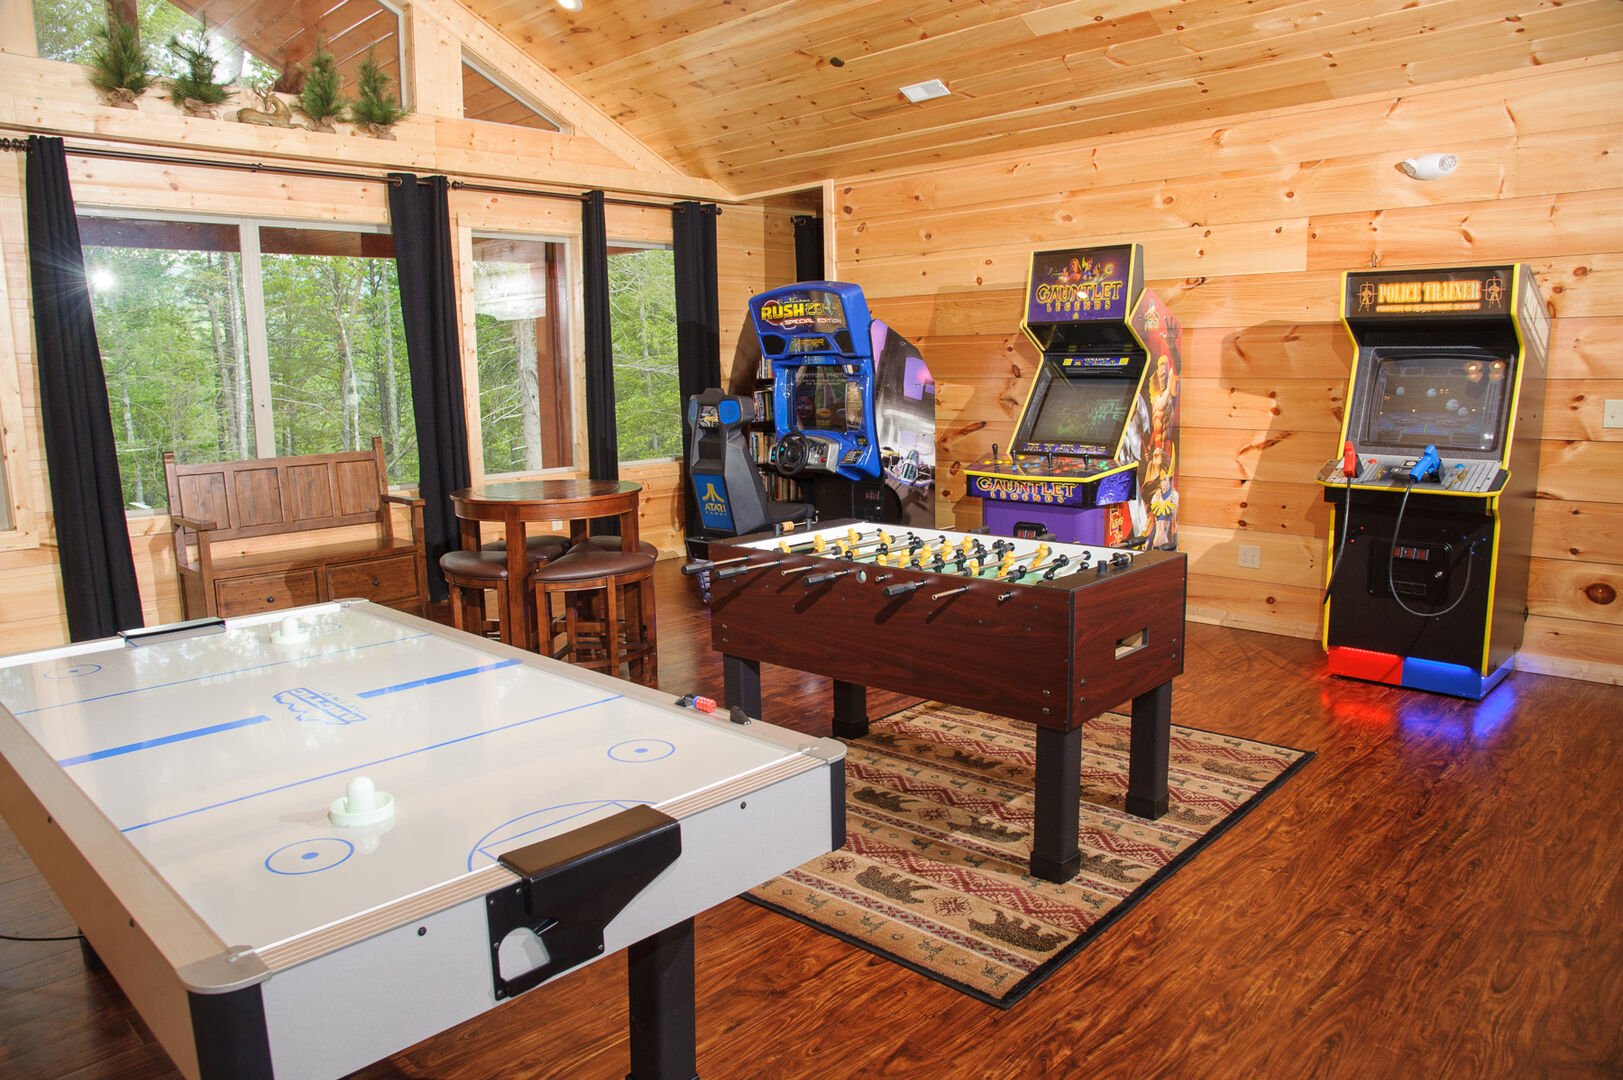 Arcade cabinets, foosball table, an air hockey table of the game room in this Vacation rental near Gatlinburg TN.